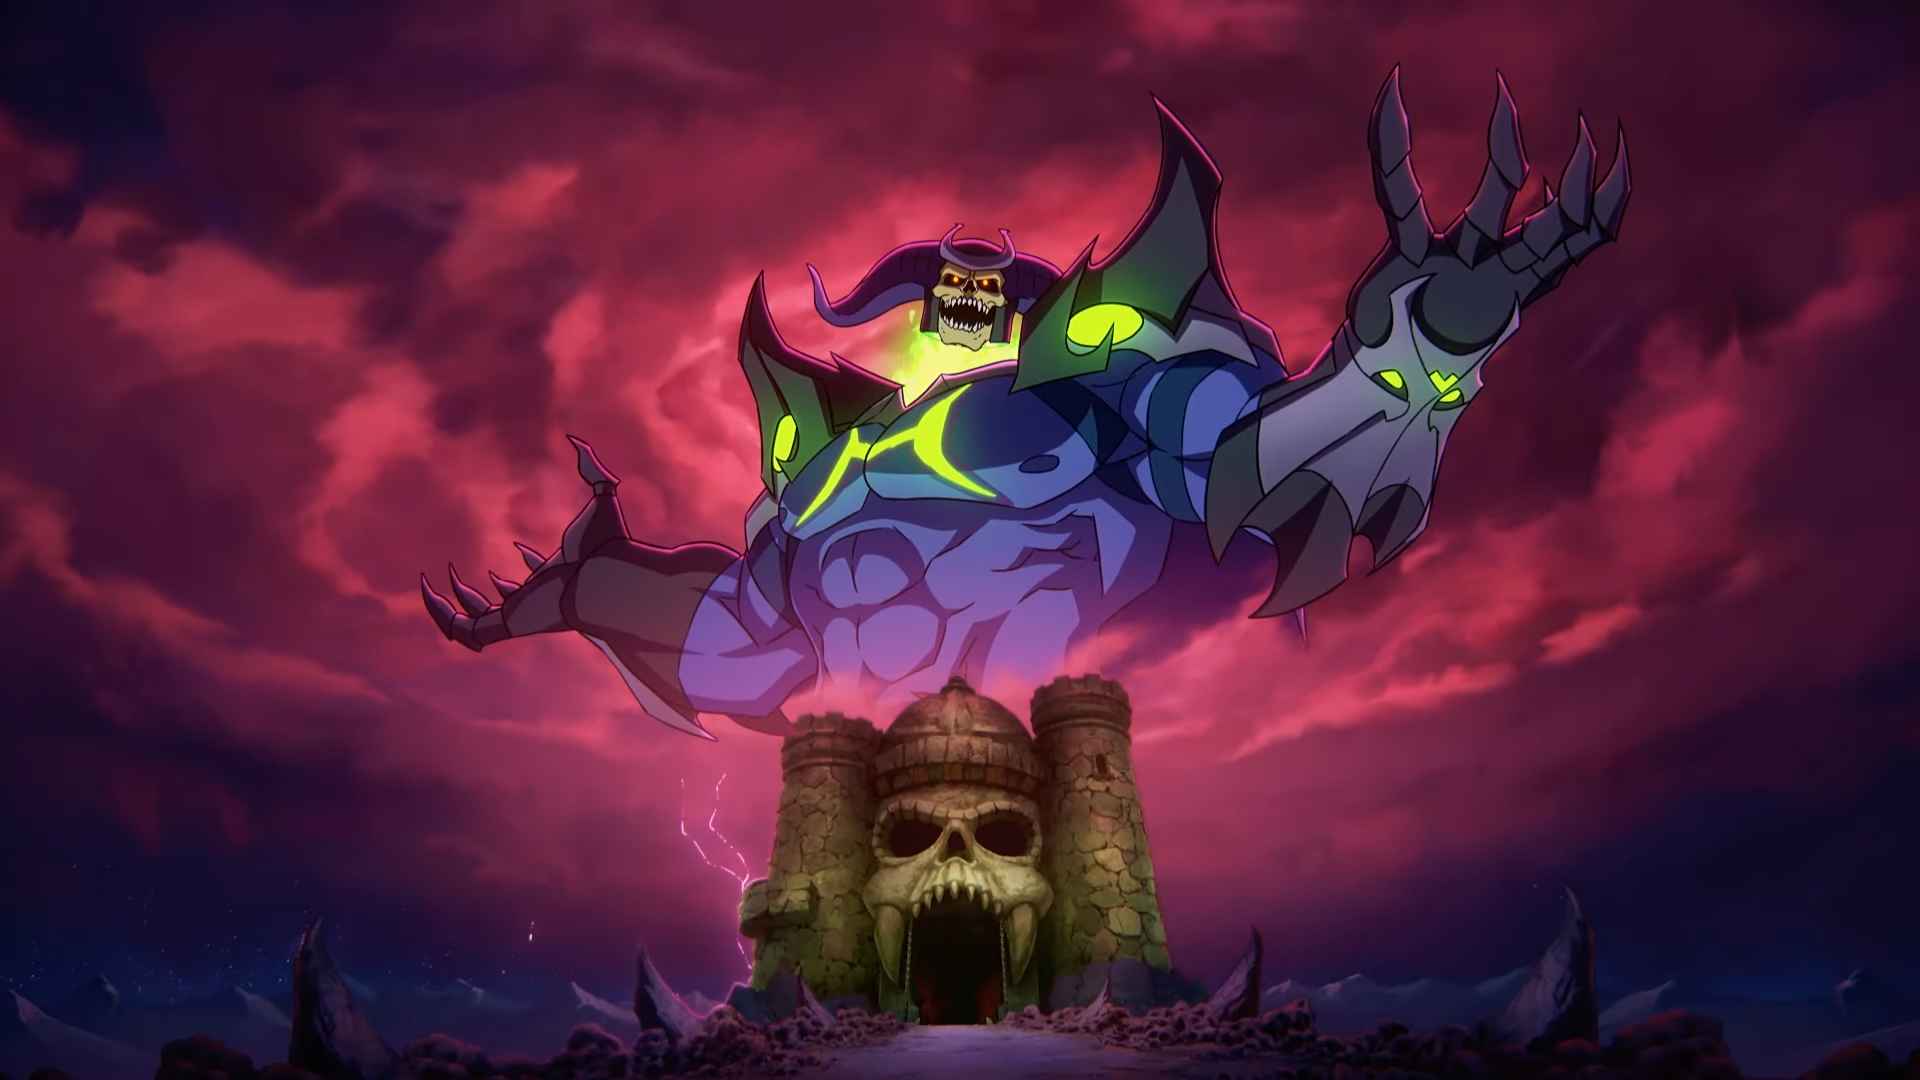 Did Part 1 End With Skeletor Holding the Sword?